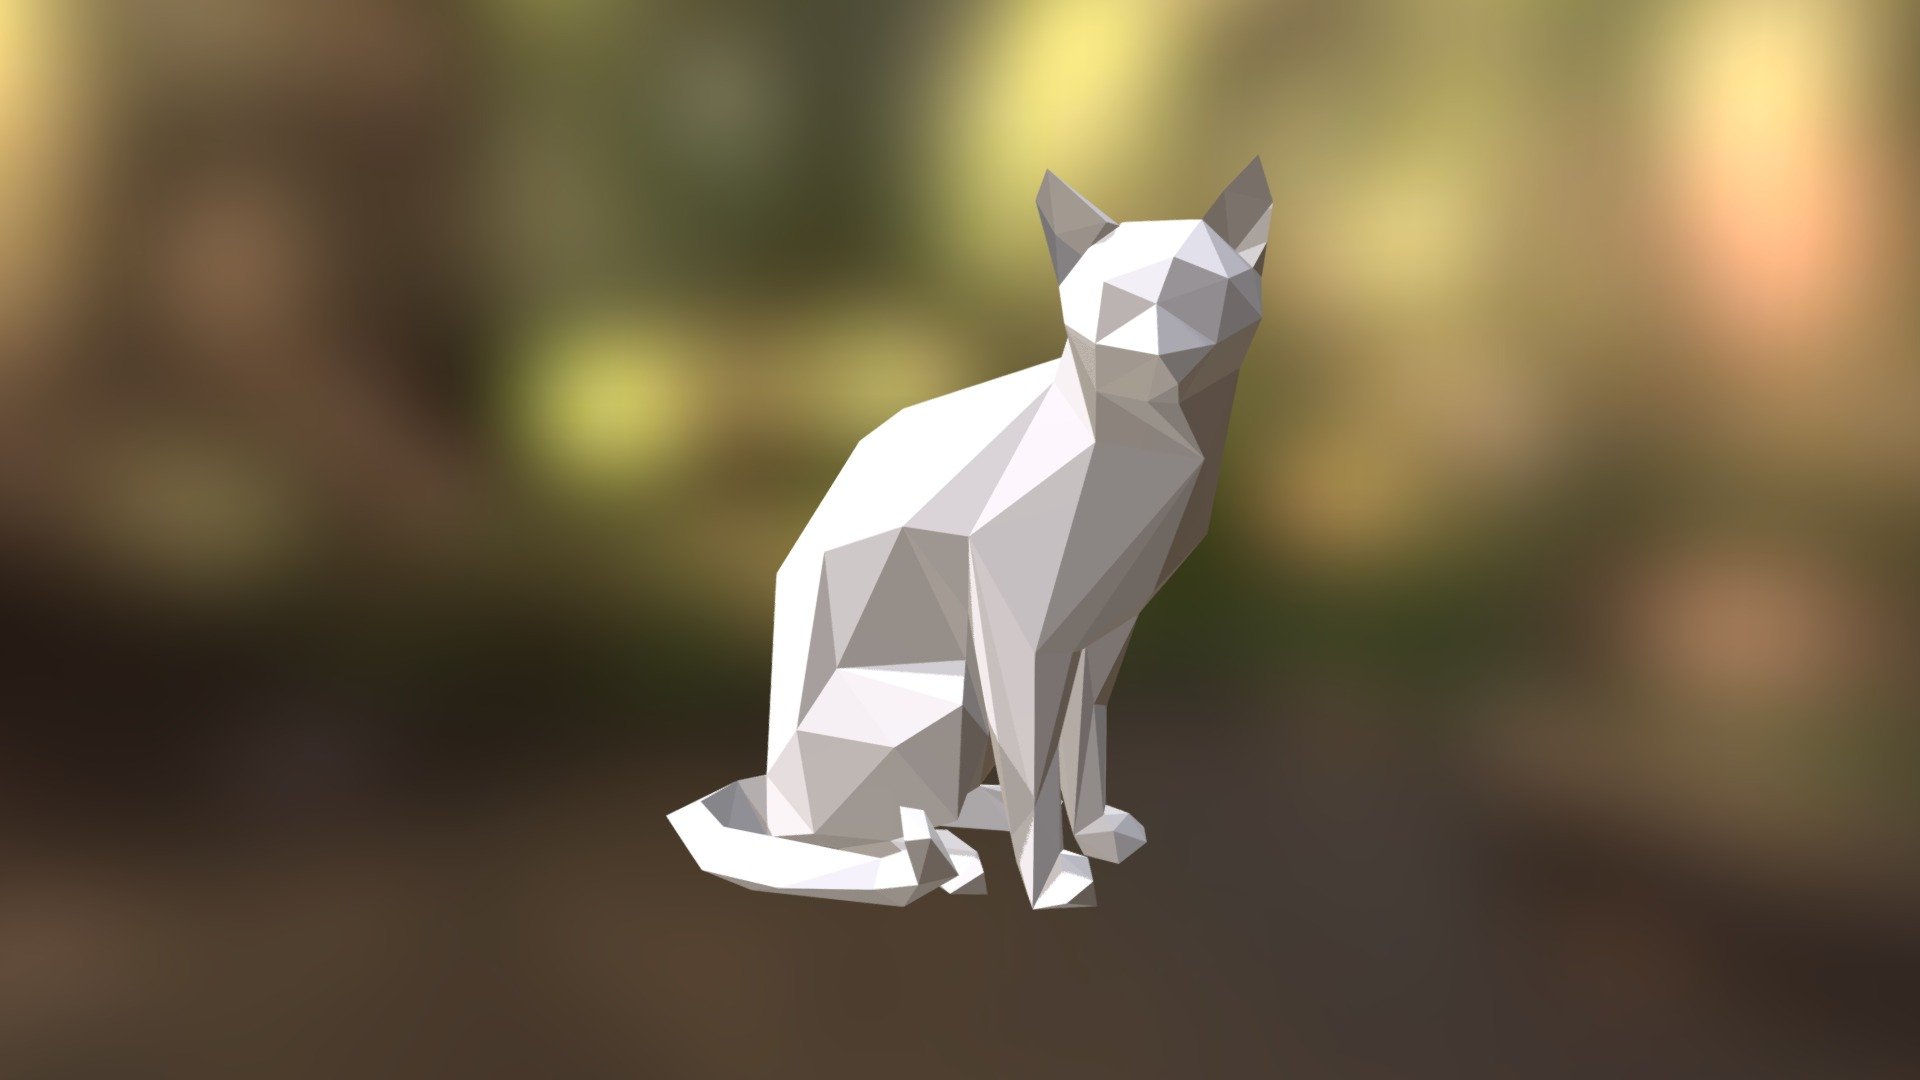 Low Poly 3D model for 3D printing. Cat Low Poly sculpture.  You can find this model for 3D printing in my shop:  -link removed-  Reference model: http://www.cadnav.com - Cat low poly model for 3D printing - 3D model by Peolla3D 3d model